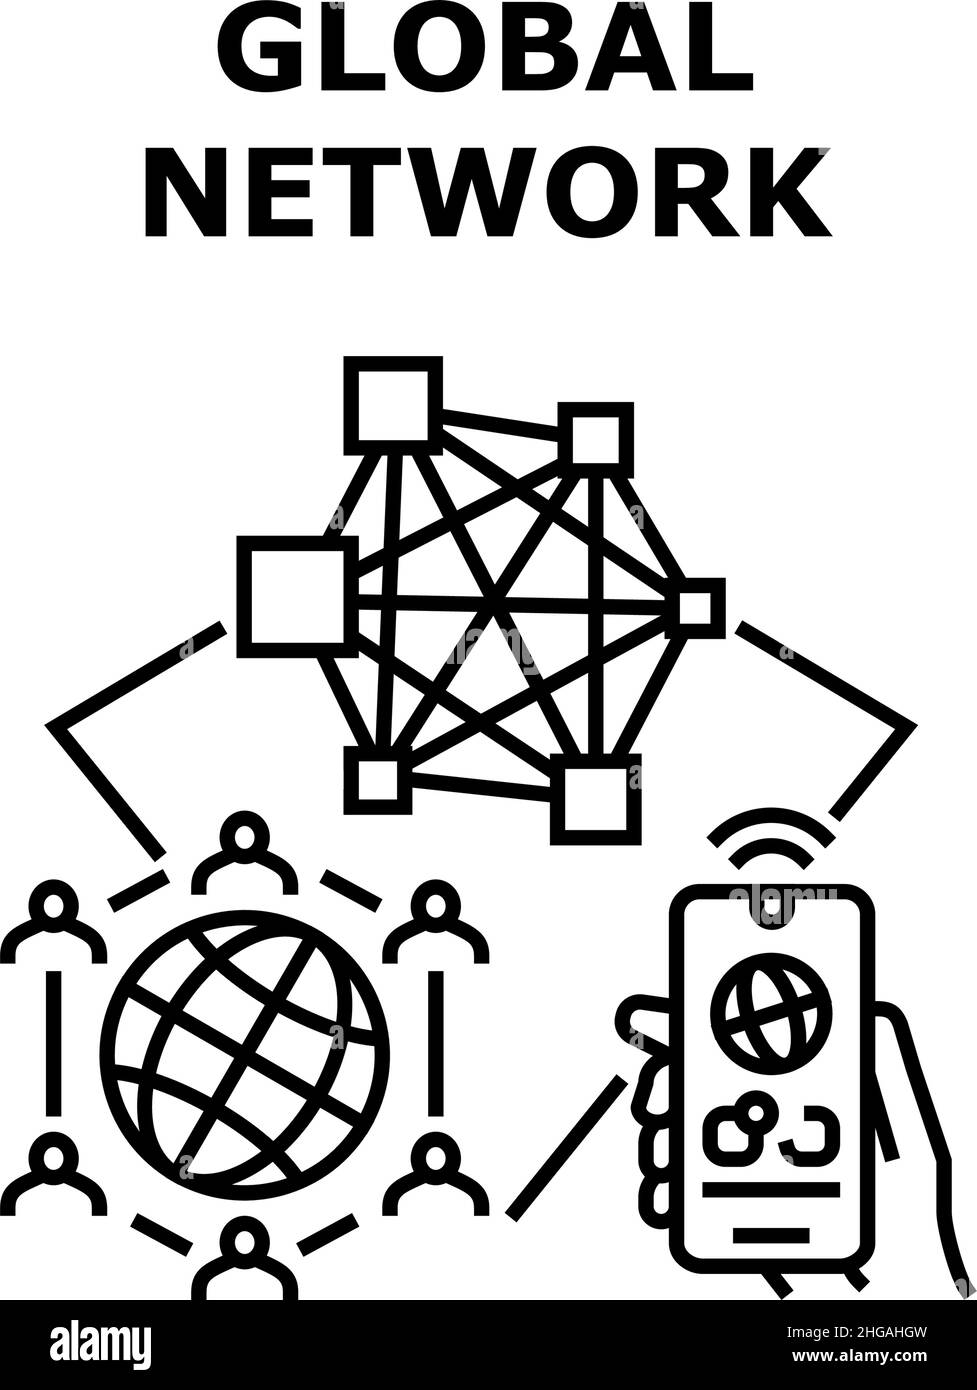 Global network icon vector illustration Stock Vector